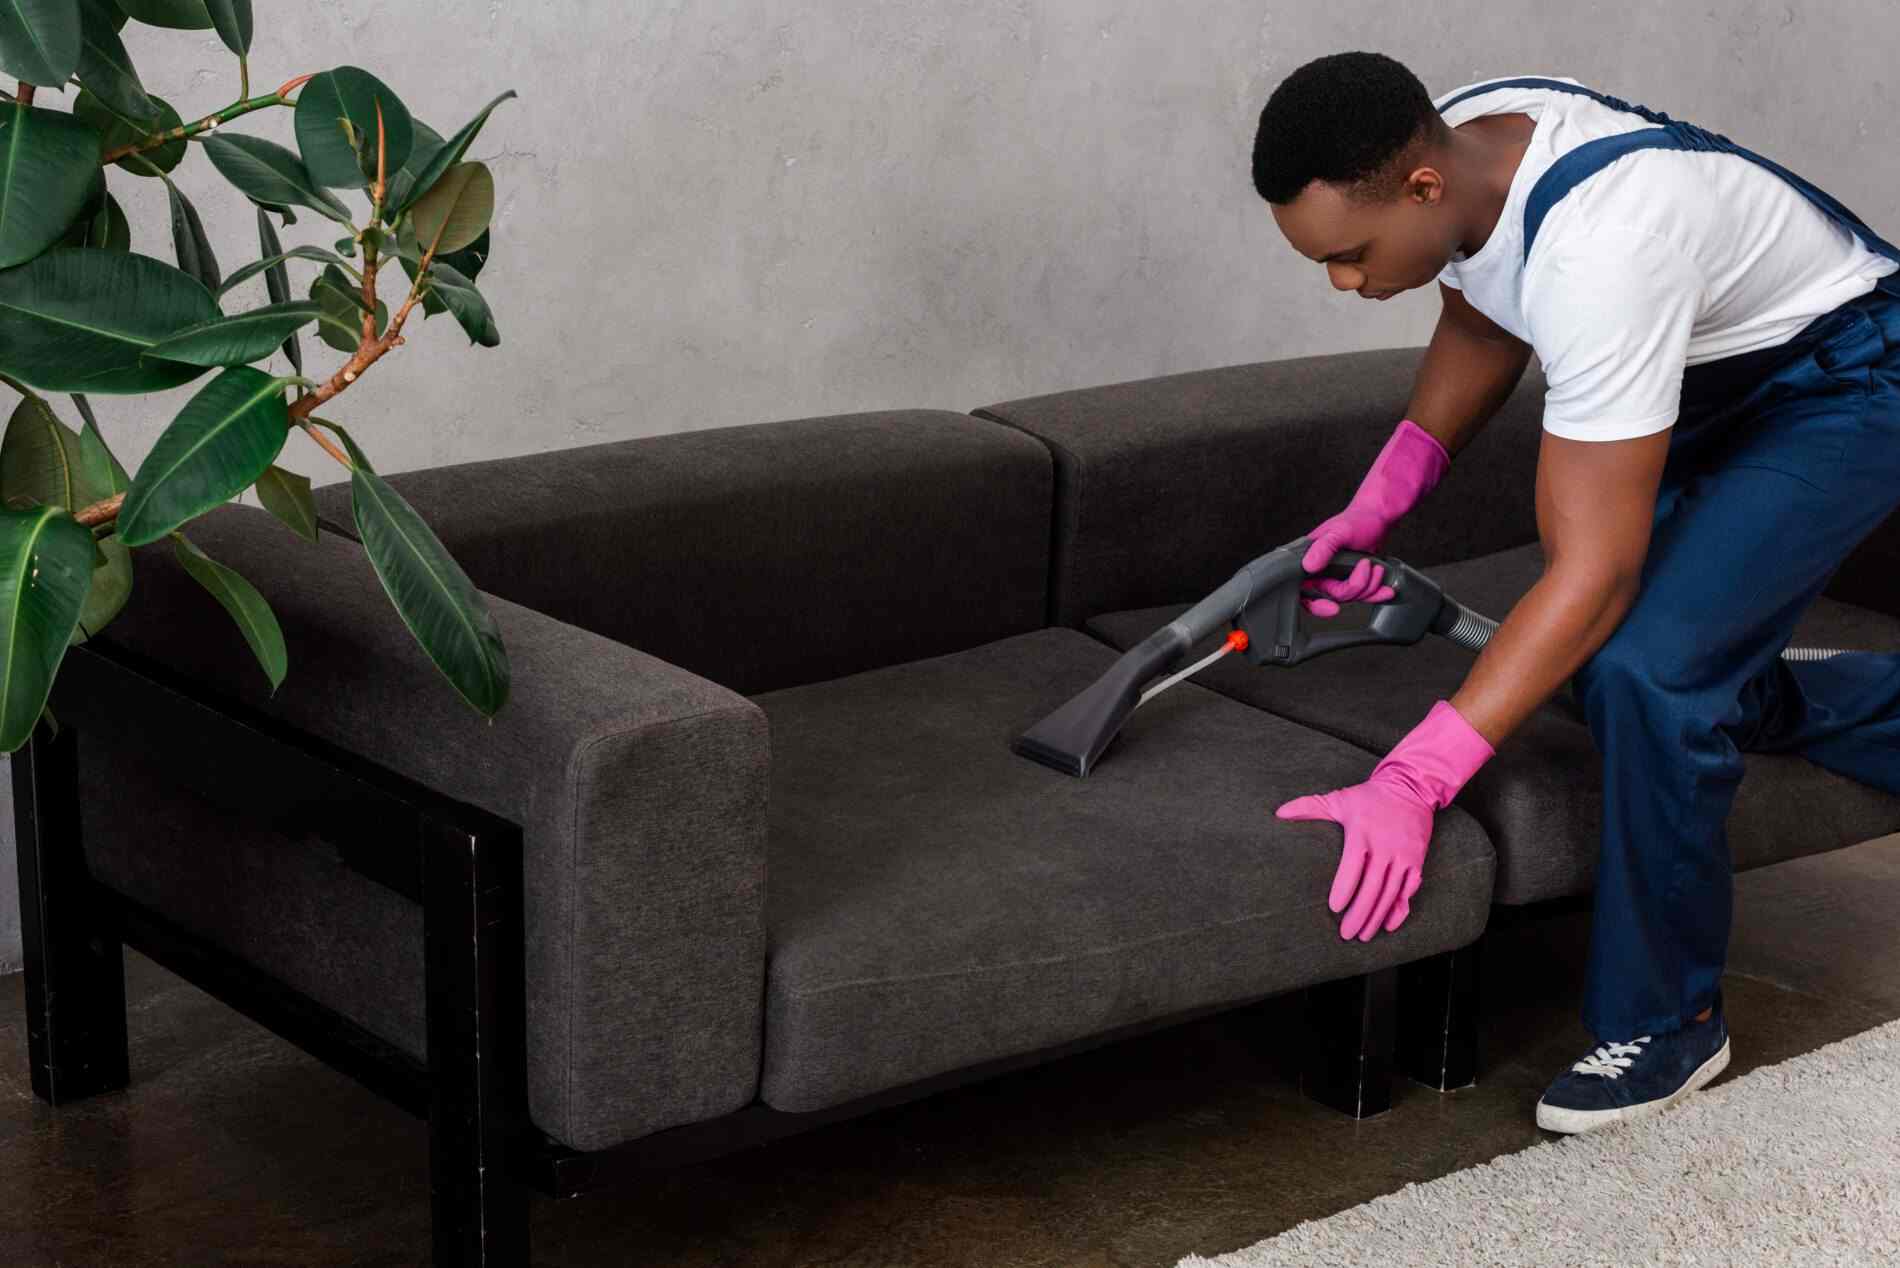 No.1 Best Upholstery Cleaning Services - Neighbor Carpet Cleaning